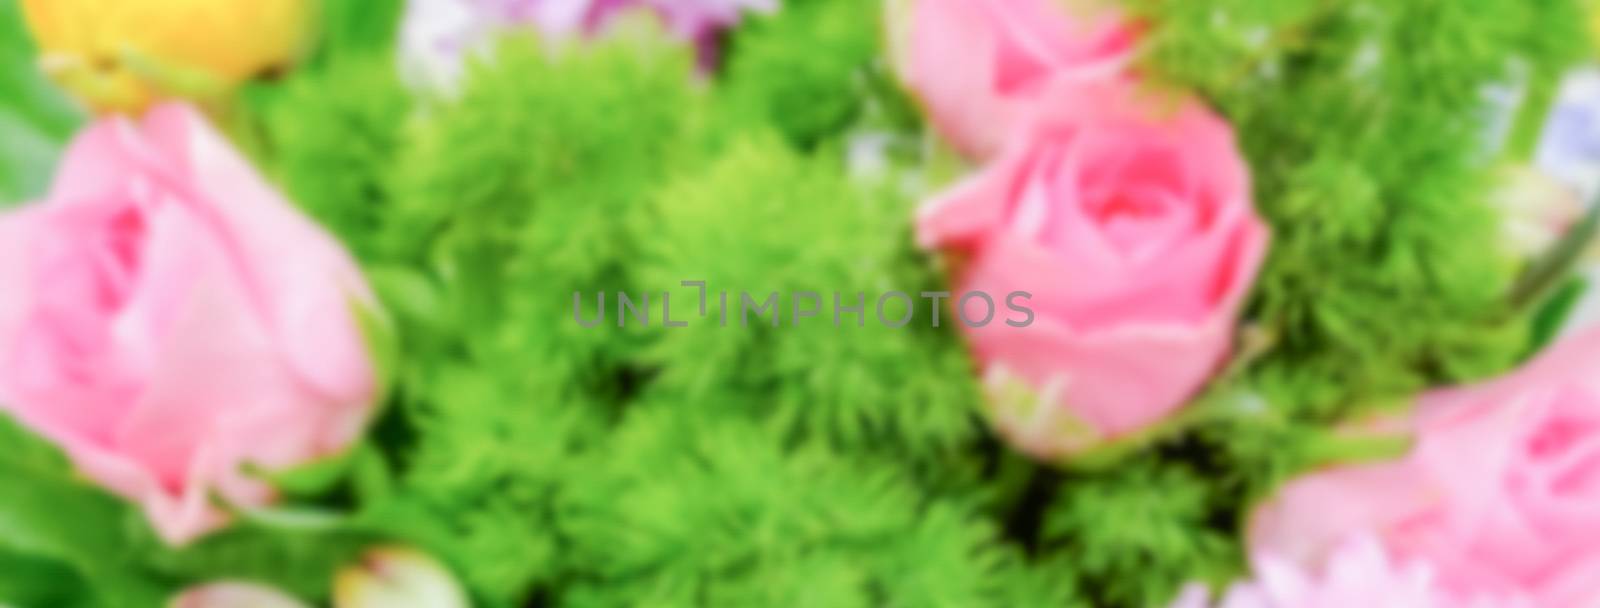 Defocused background of a colorful mix of flowers. Intentionally blurred post production for bokeh effect